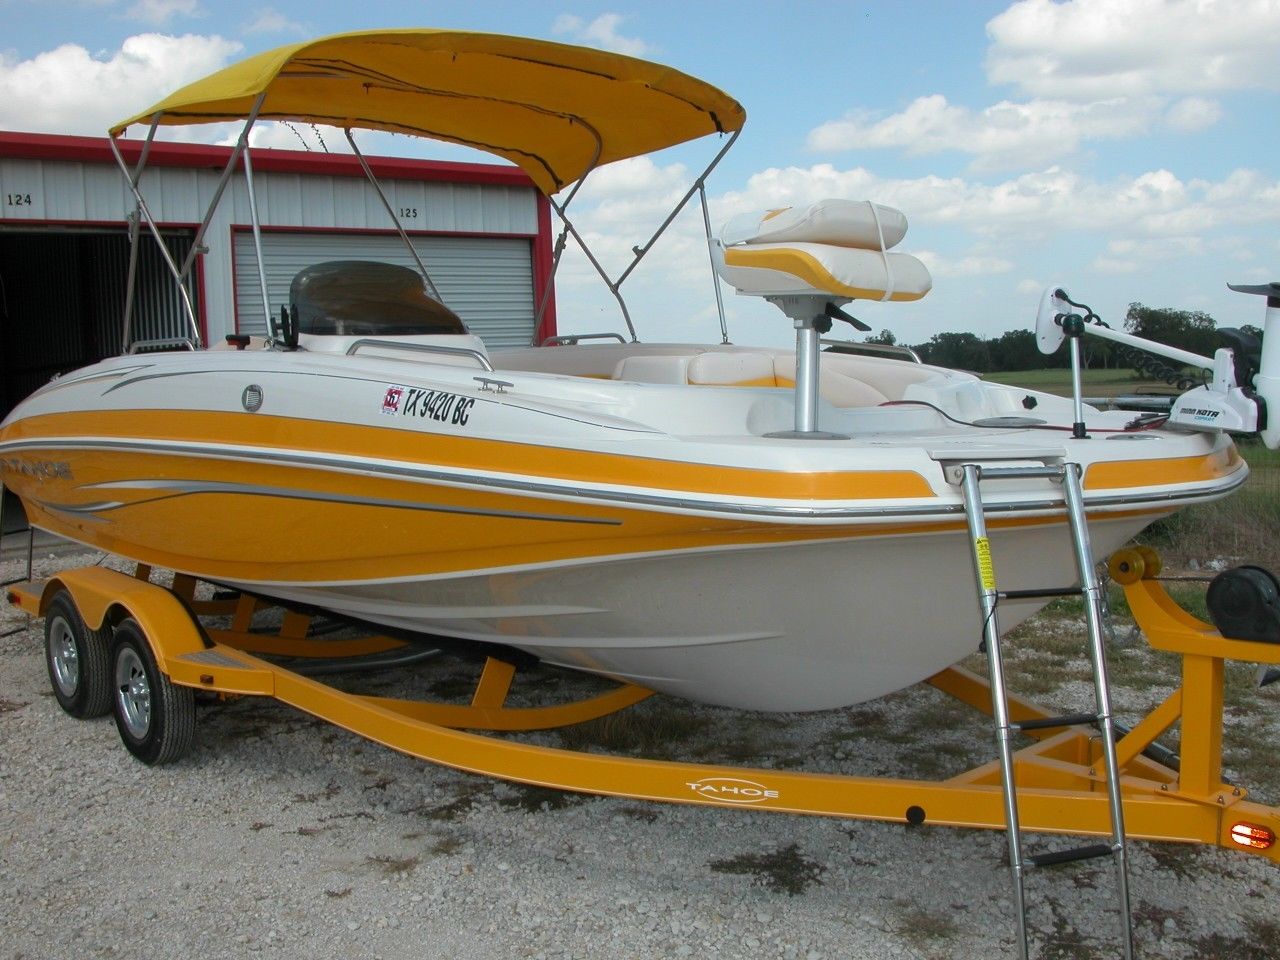 tahoe 195 2010 for sale for $18,000 - boats-from-usa.com